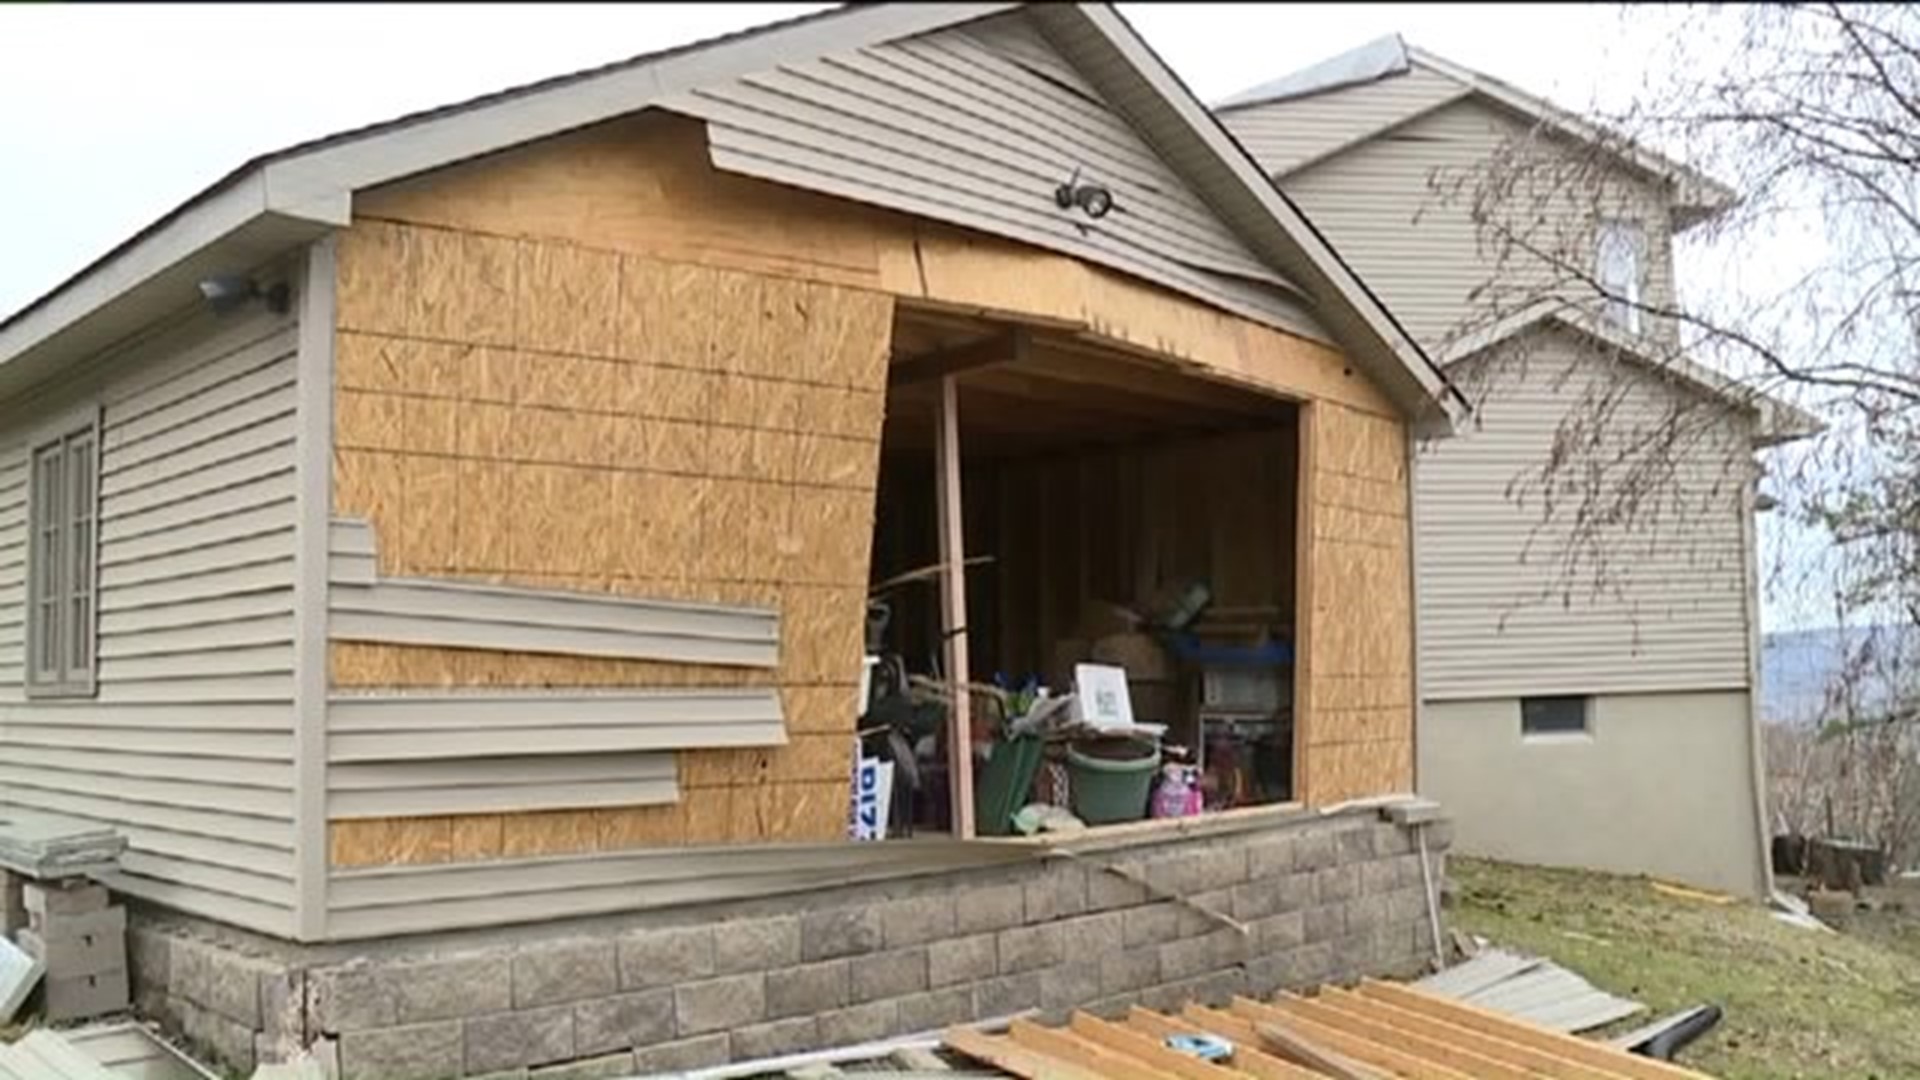 Path of Destruction from Tornado in Lackawanna, Luzerne Counties